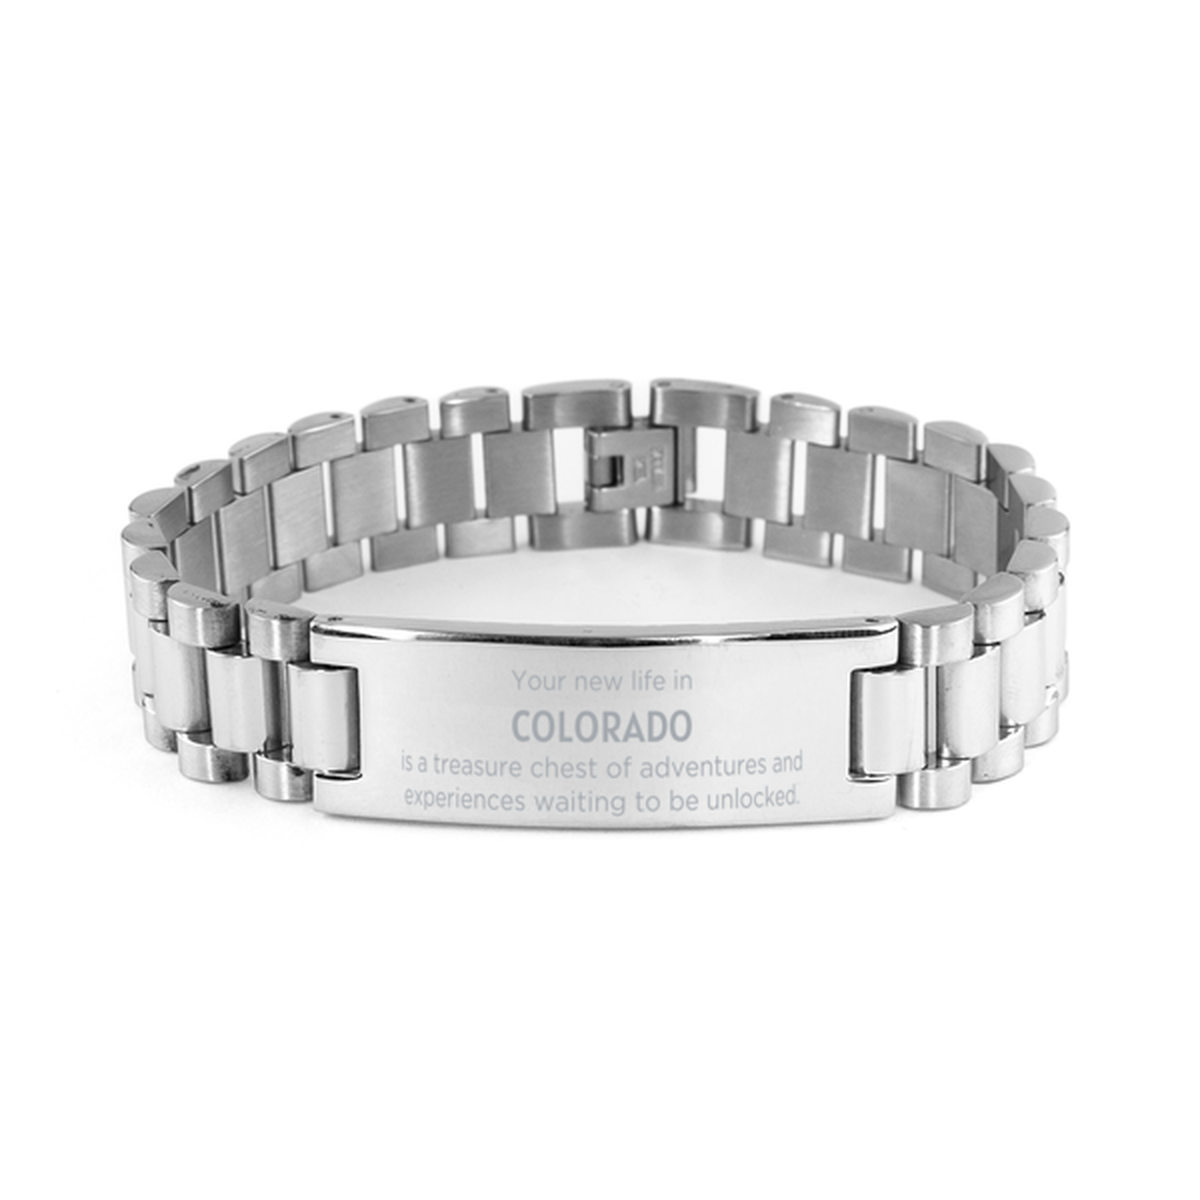 Moving to Colorado Gifts, Your new life in Colorado, Long Distance Colorado Christmas Ladder Stainless Steel Bracelet For Men, Women, Friends, Coworkers